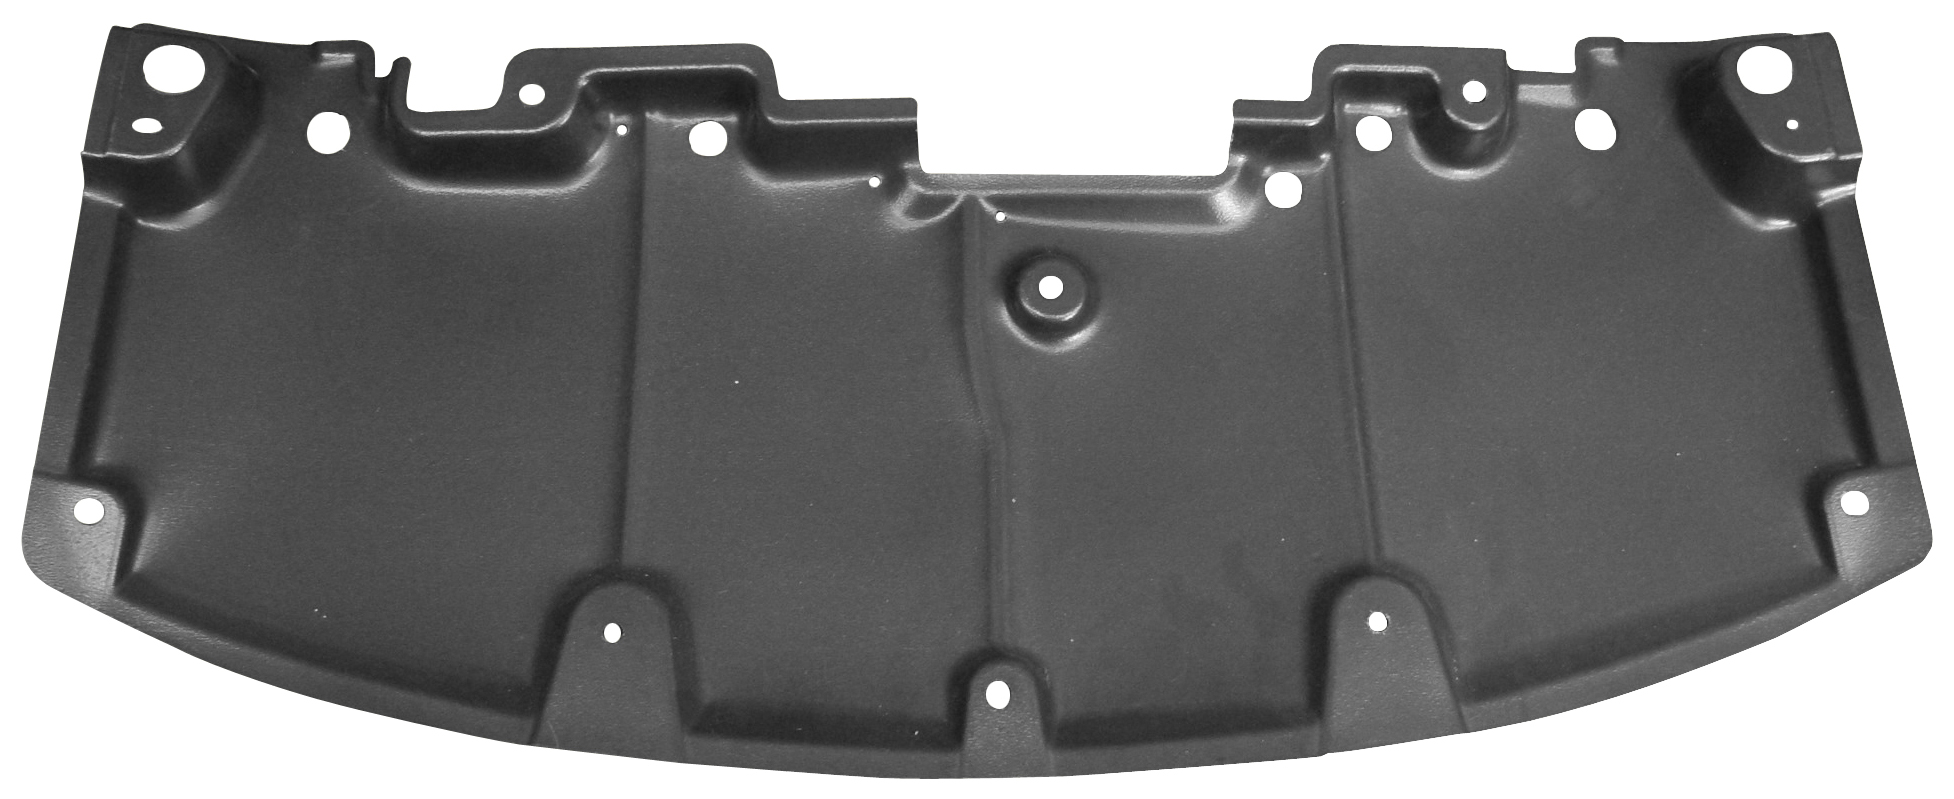 Aftermarket UNDER ENGINE COVERS for TOYOTA - COROLLA, COROLLA,14-16,Lower engine cover